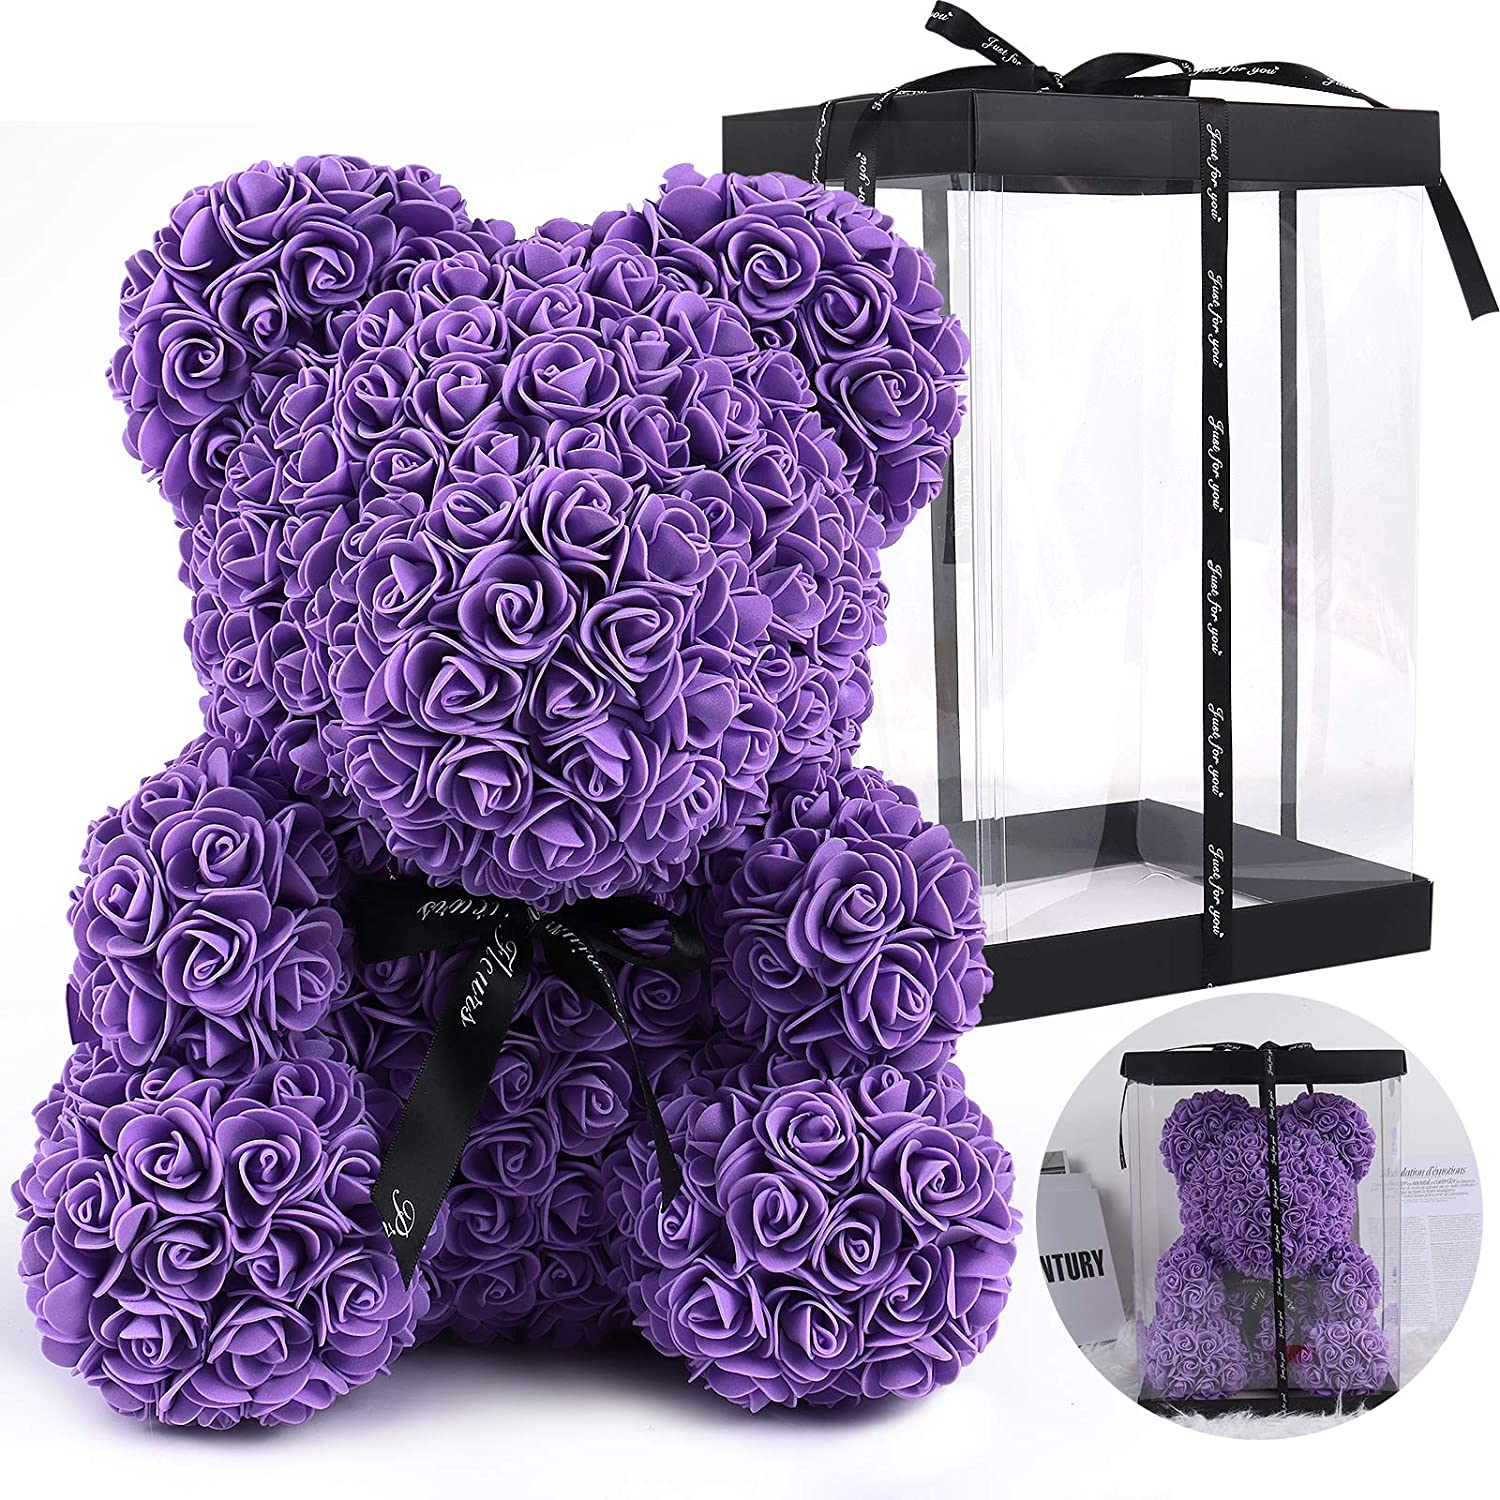 Wholesale Recutms Artificial Rose Bear Flowers Rose Teddy Bear 10 Inch Wedding Party Decoration